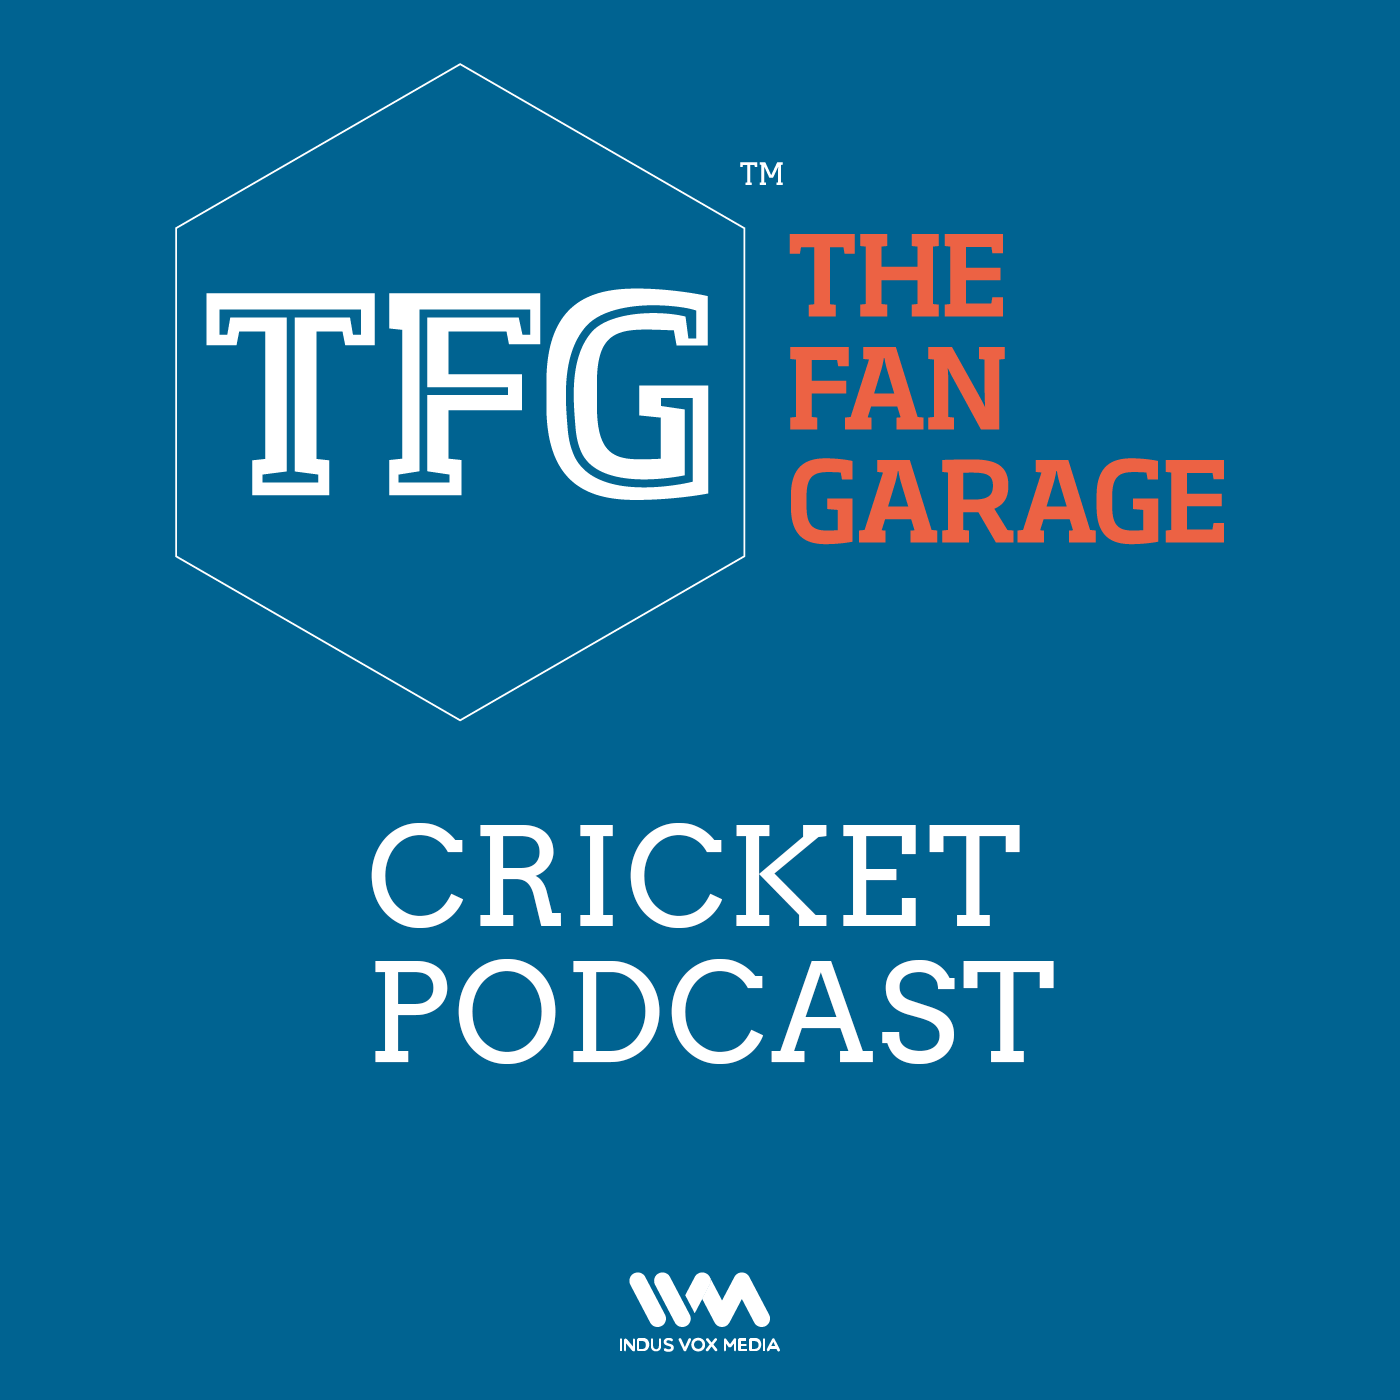 TFG Cricket Ep. 037: KXIP 2017 Preview: Another Disappointing Season Expected